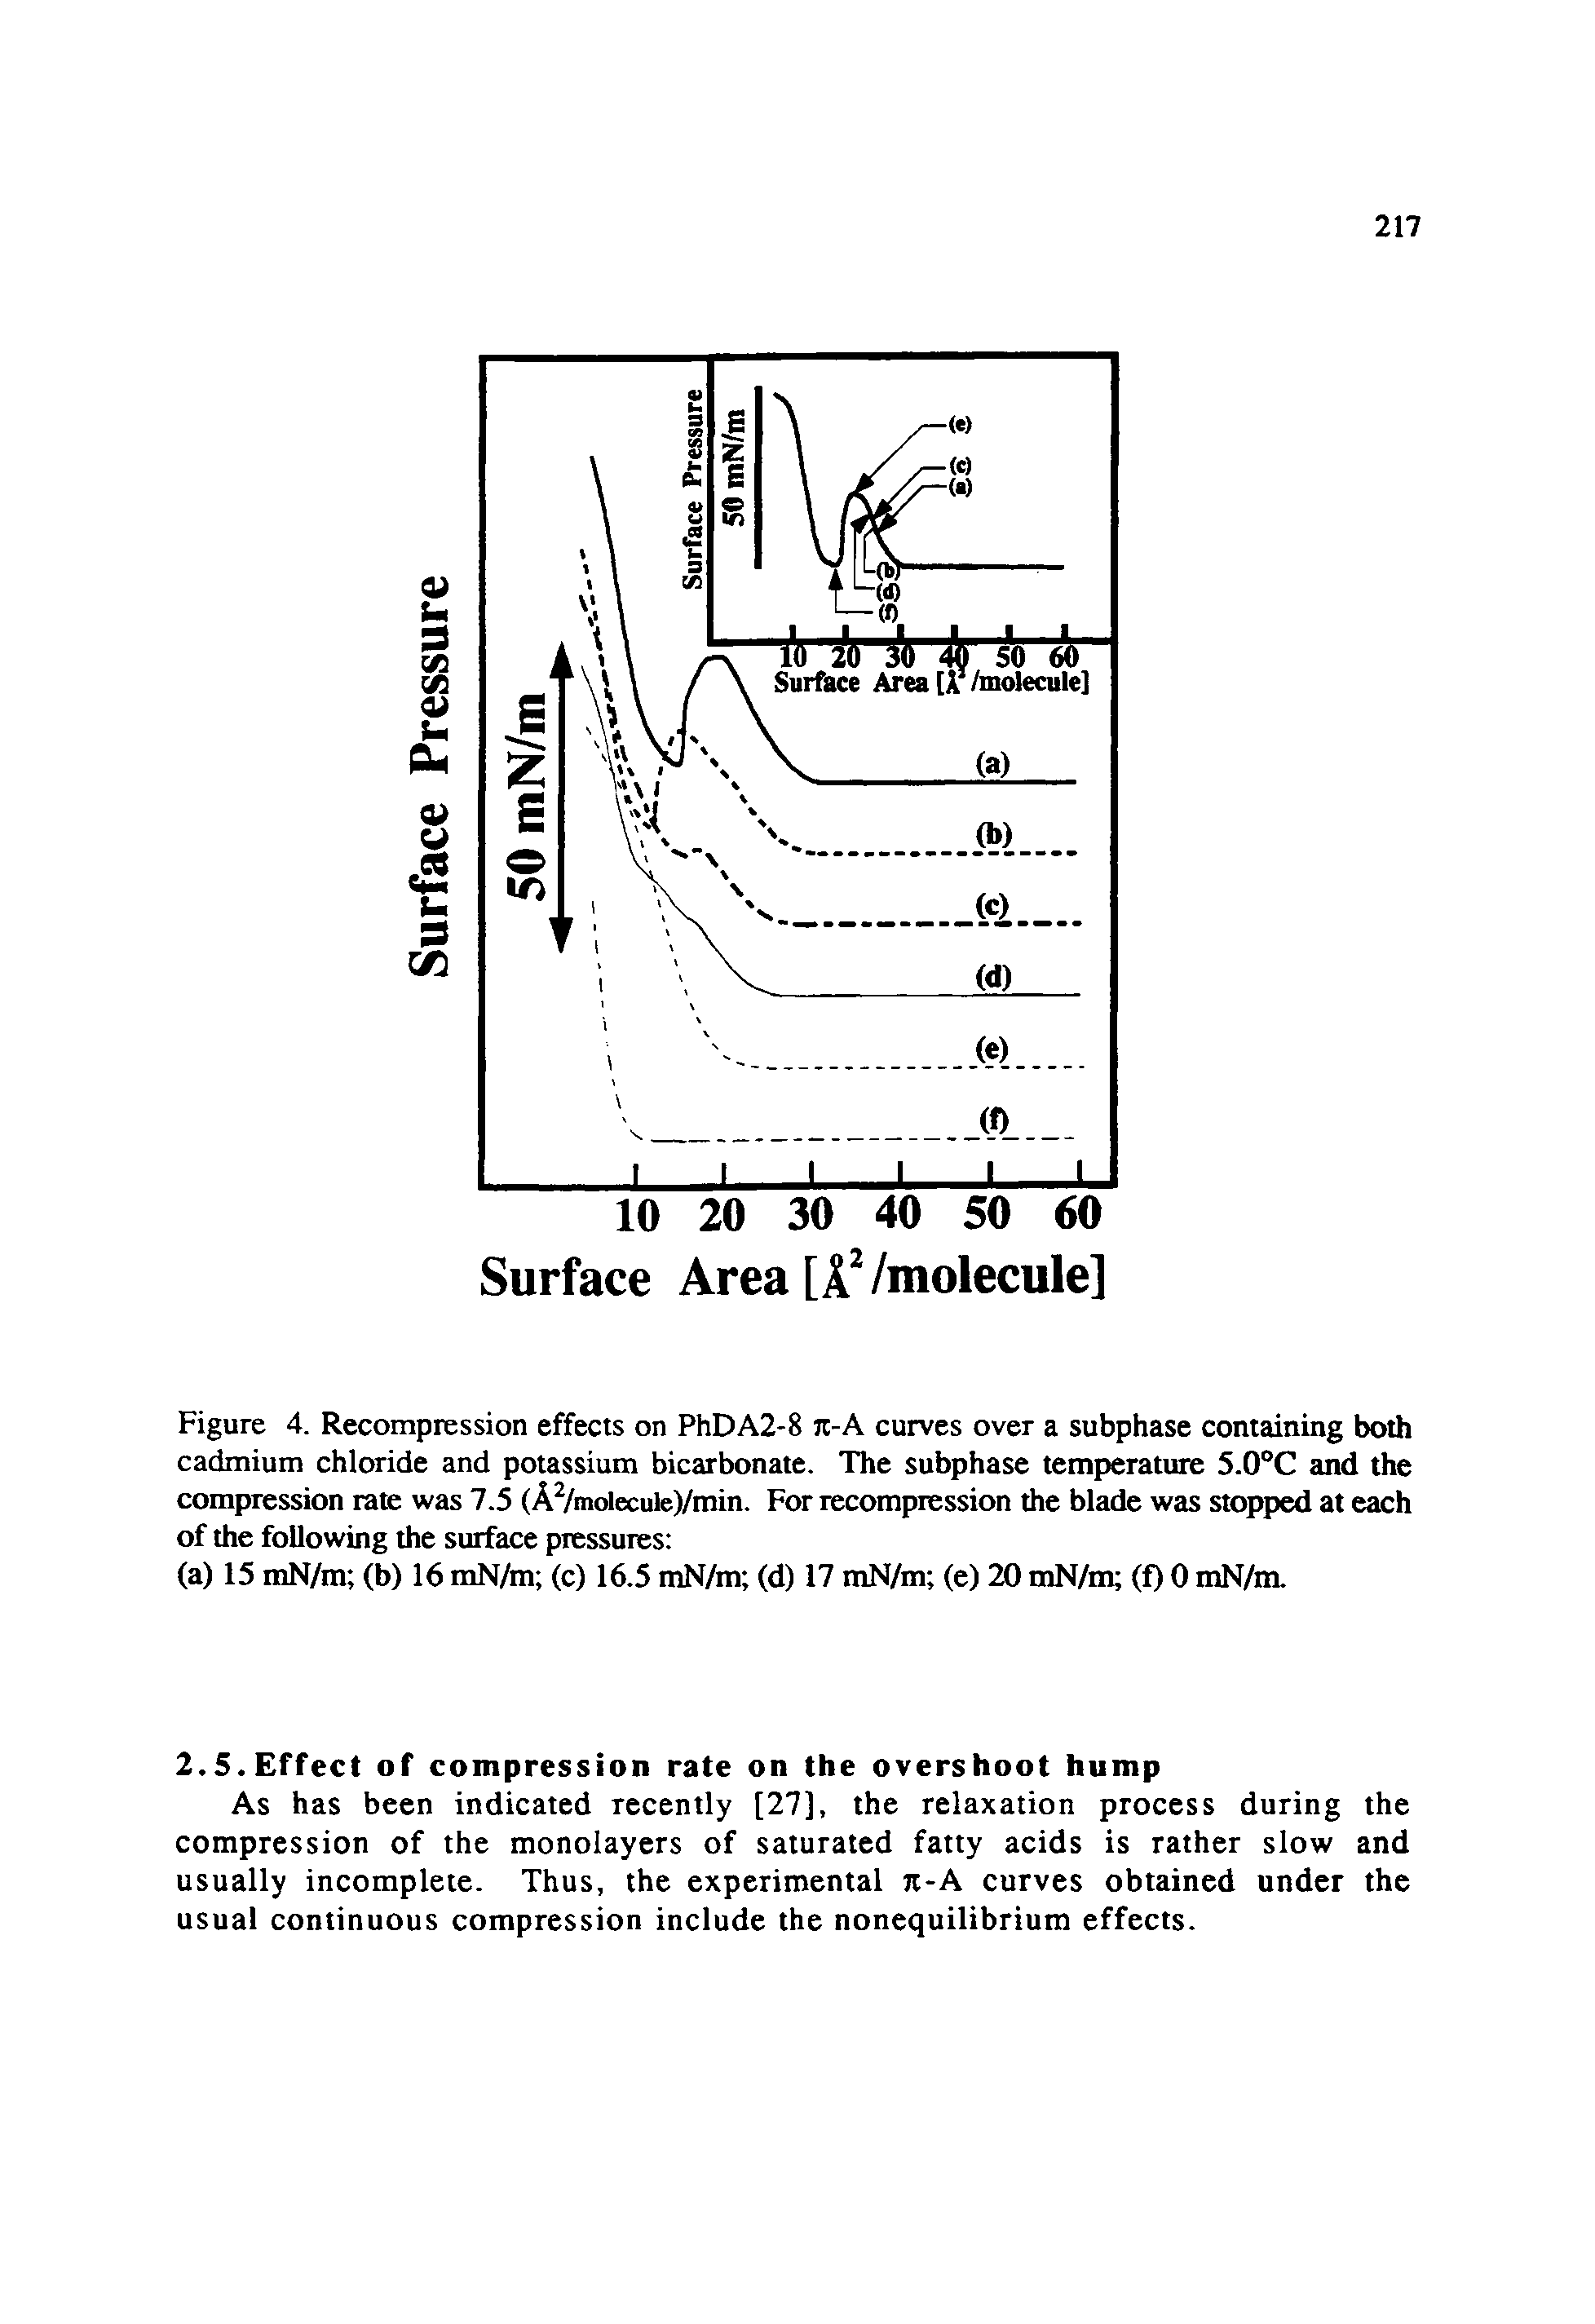 Figure 4. Recompression effects on PhDA2-8 jc-A curves over a subphase containing both cadmium chloride and potassium bicarbonate. The subphase temperature 5.0°C and the compression rate was 7.5 (A2/molecule)/min. For recompiession the blade was stopped at each of the following the surface pressures ...